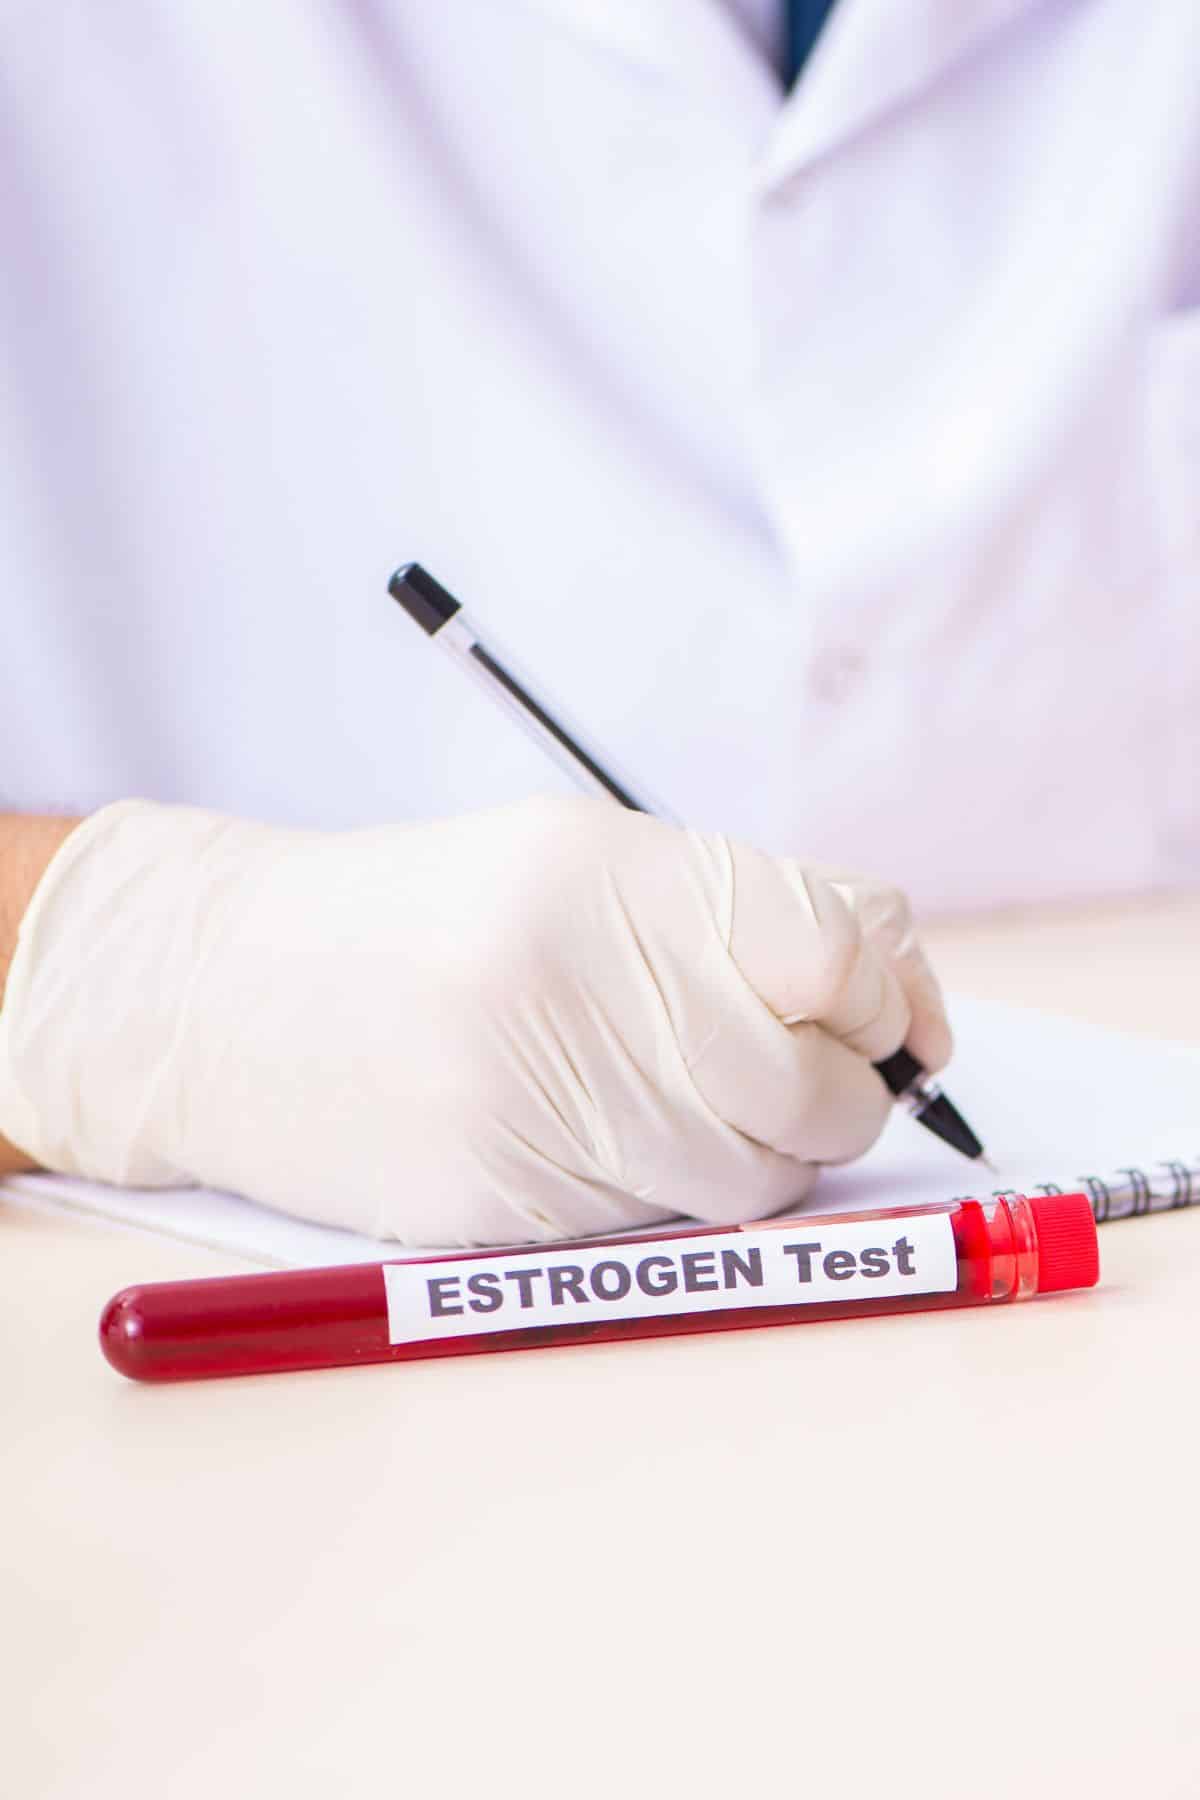 a vial in front of a doctor labeled "estrogen test".